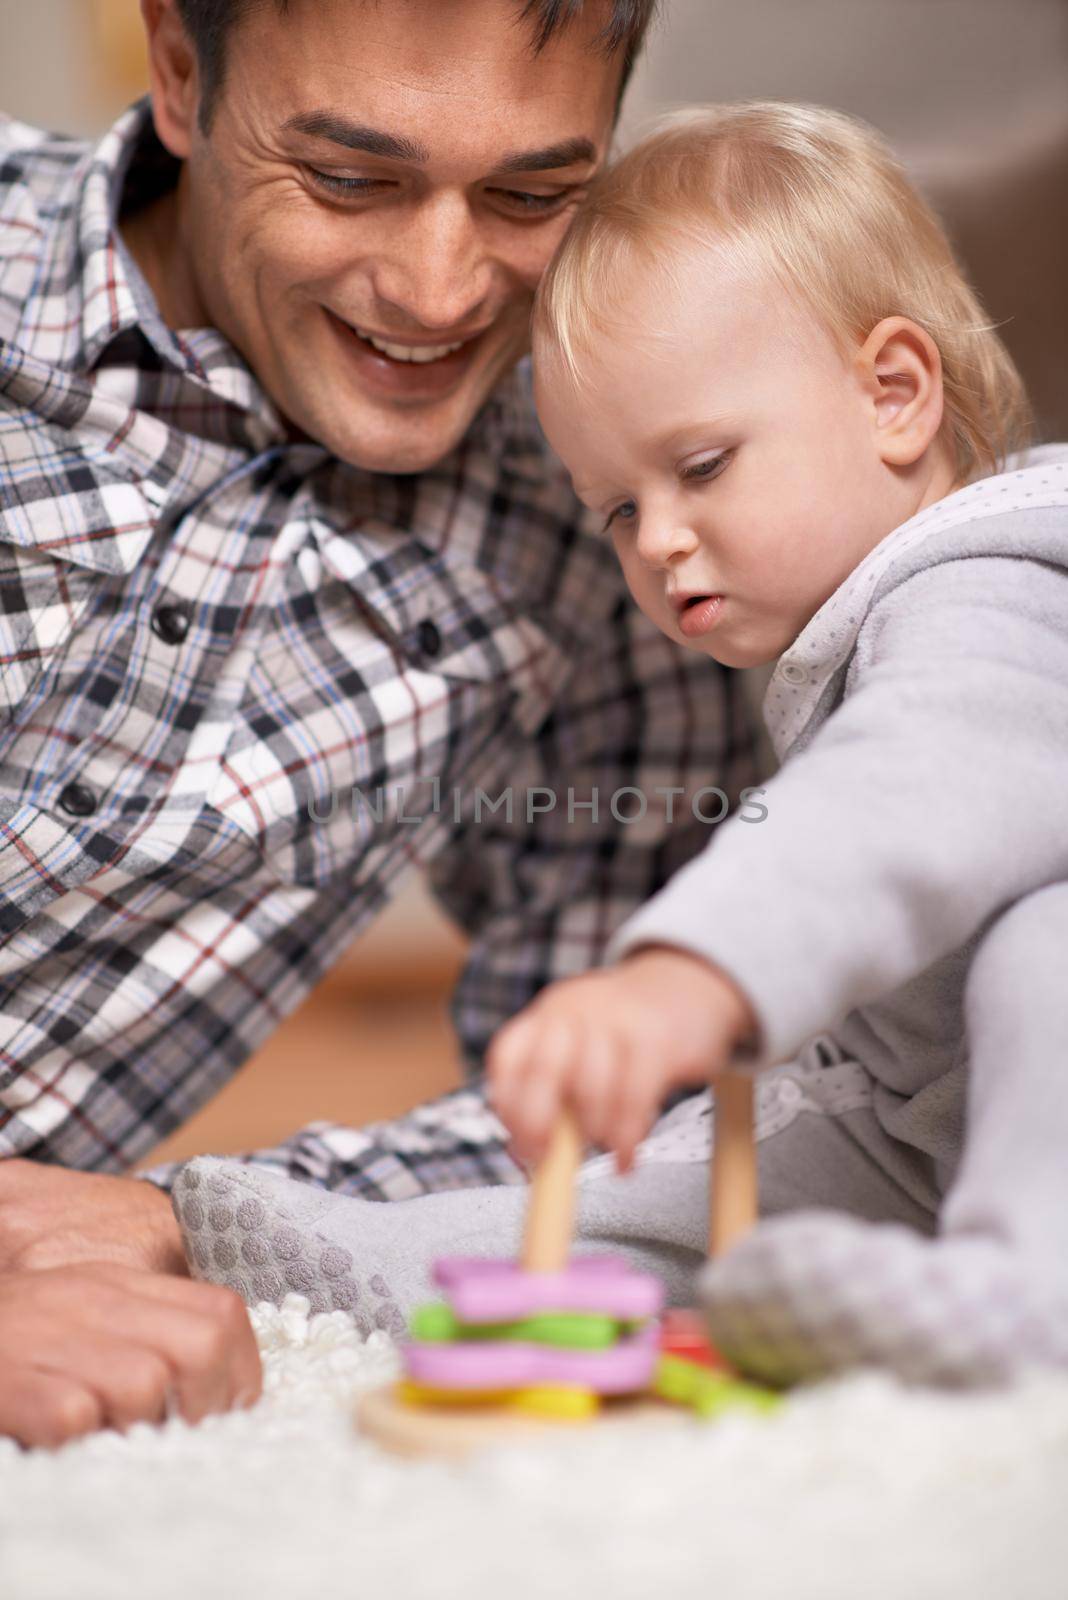 Spwnding time with my little princess. A single father sitting with his baby girl as she plays with blocks